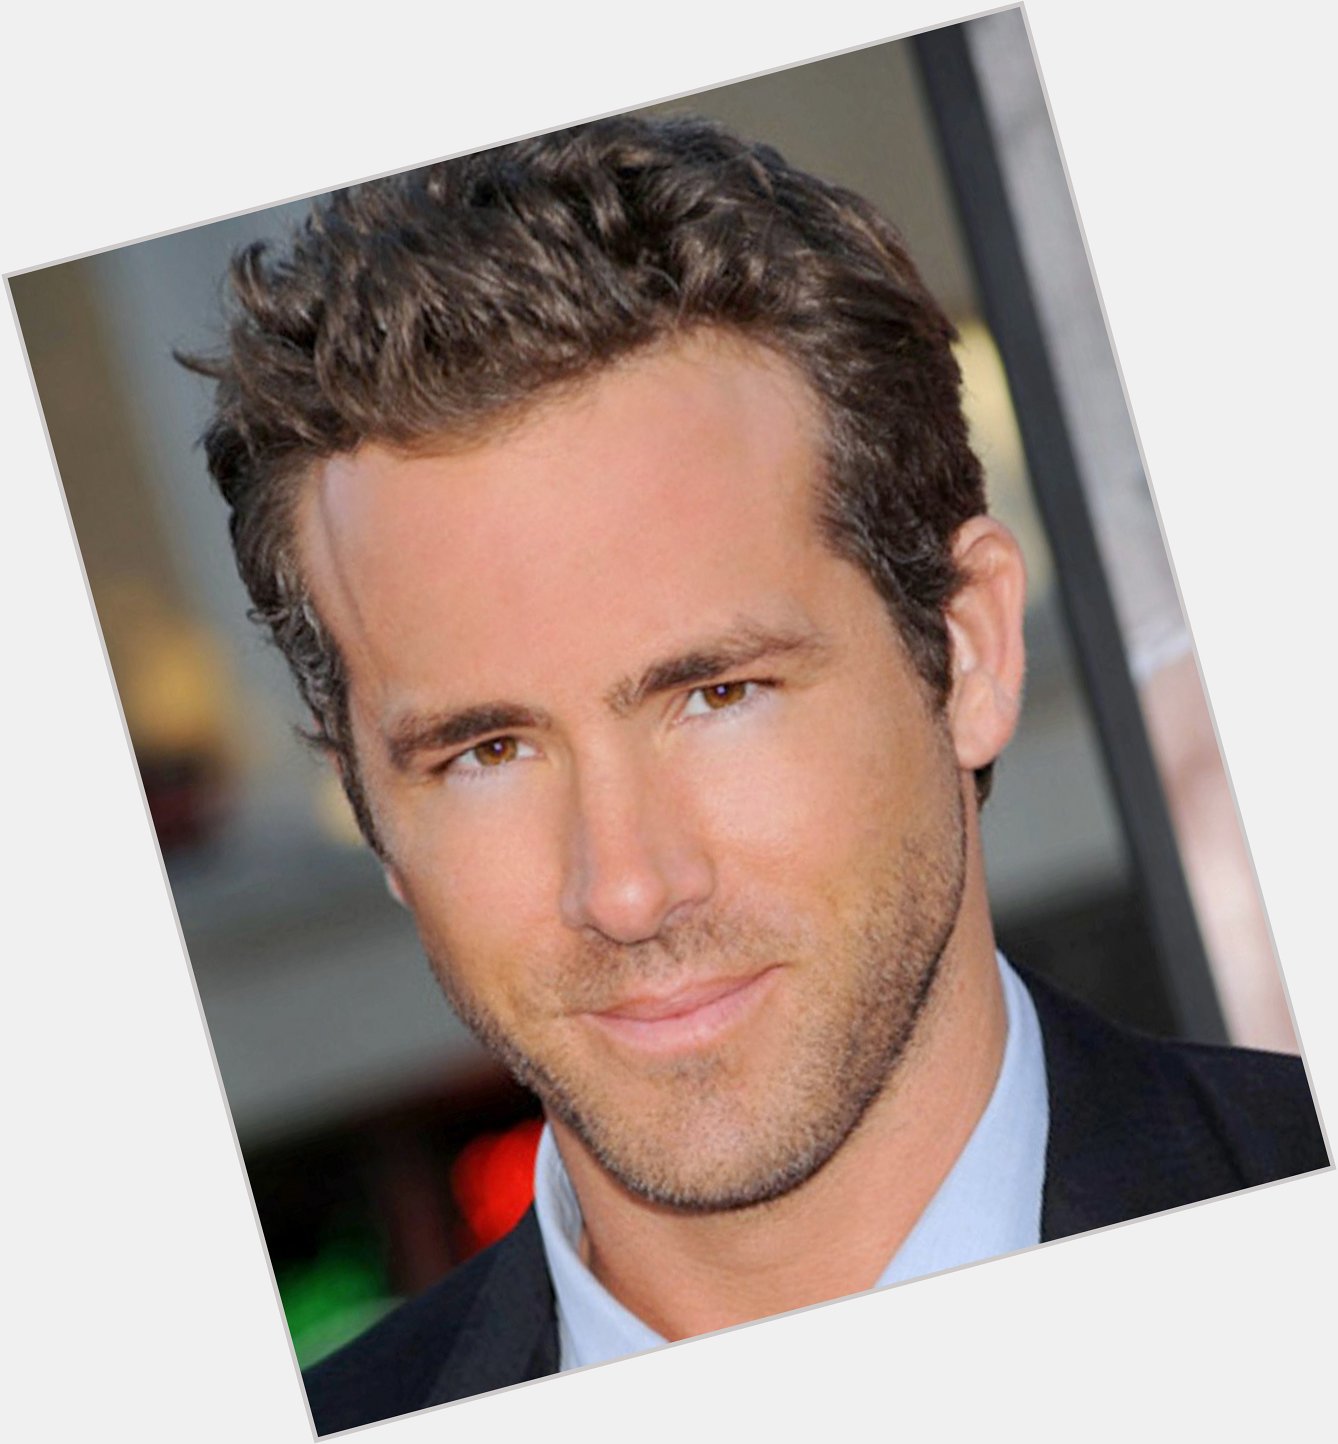 Ryan Reynolds October 23 Sending Very Happy Birthday Wishes! Continued Success! 